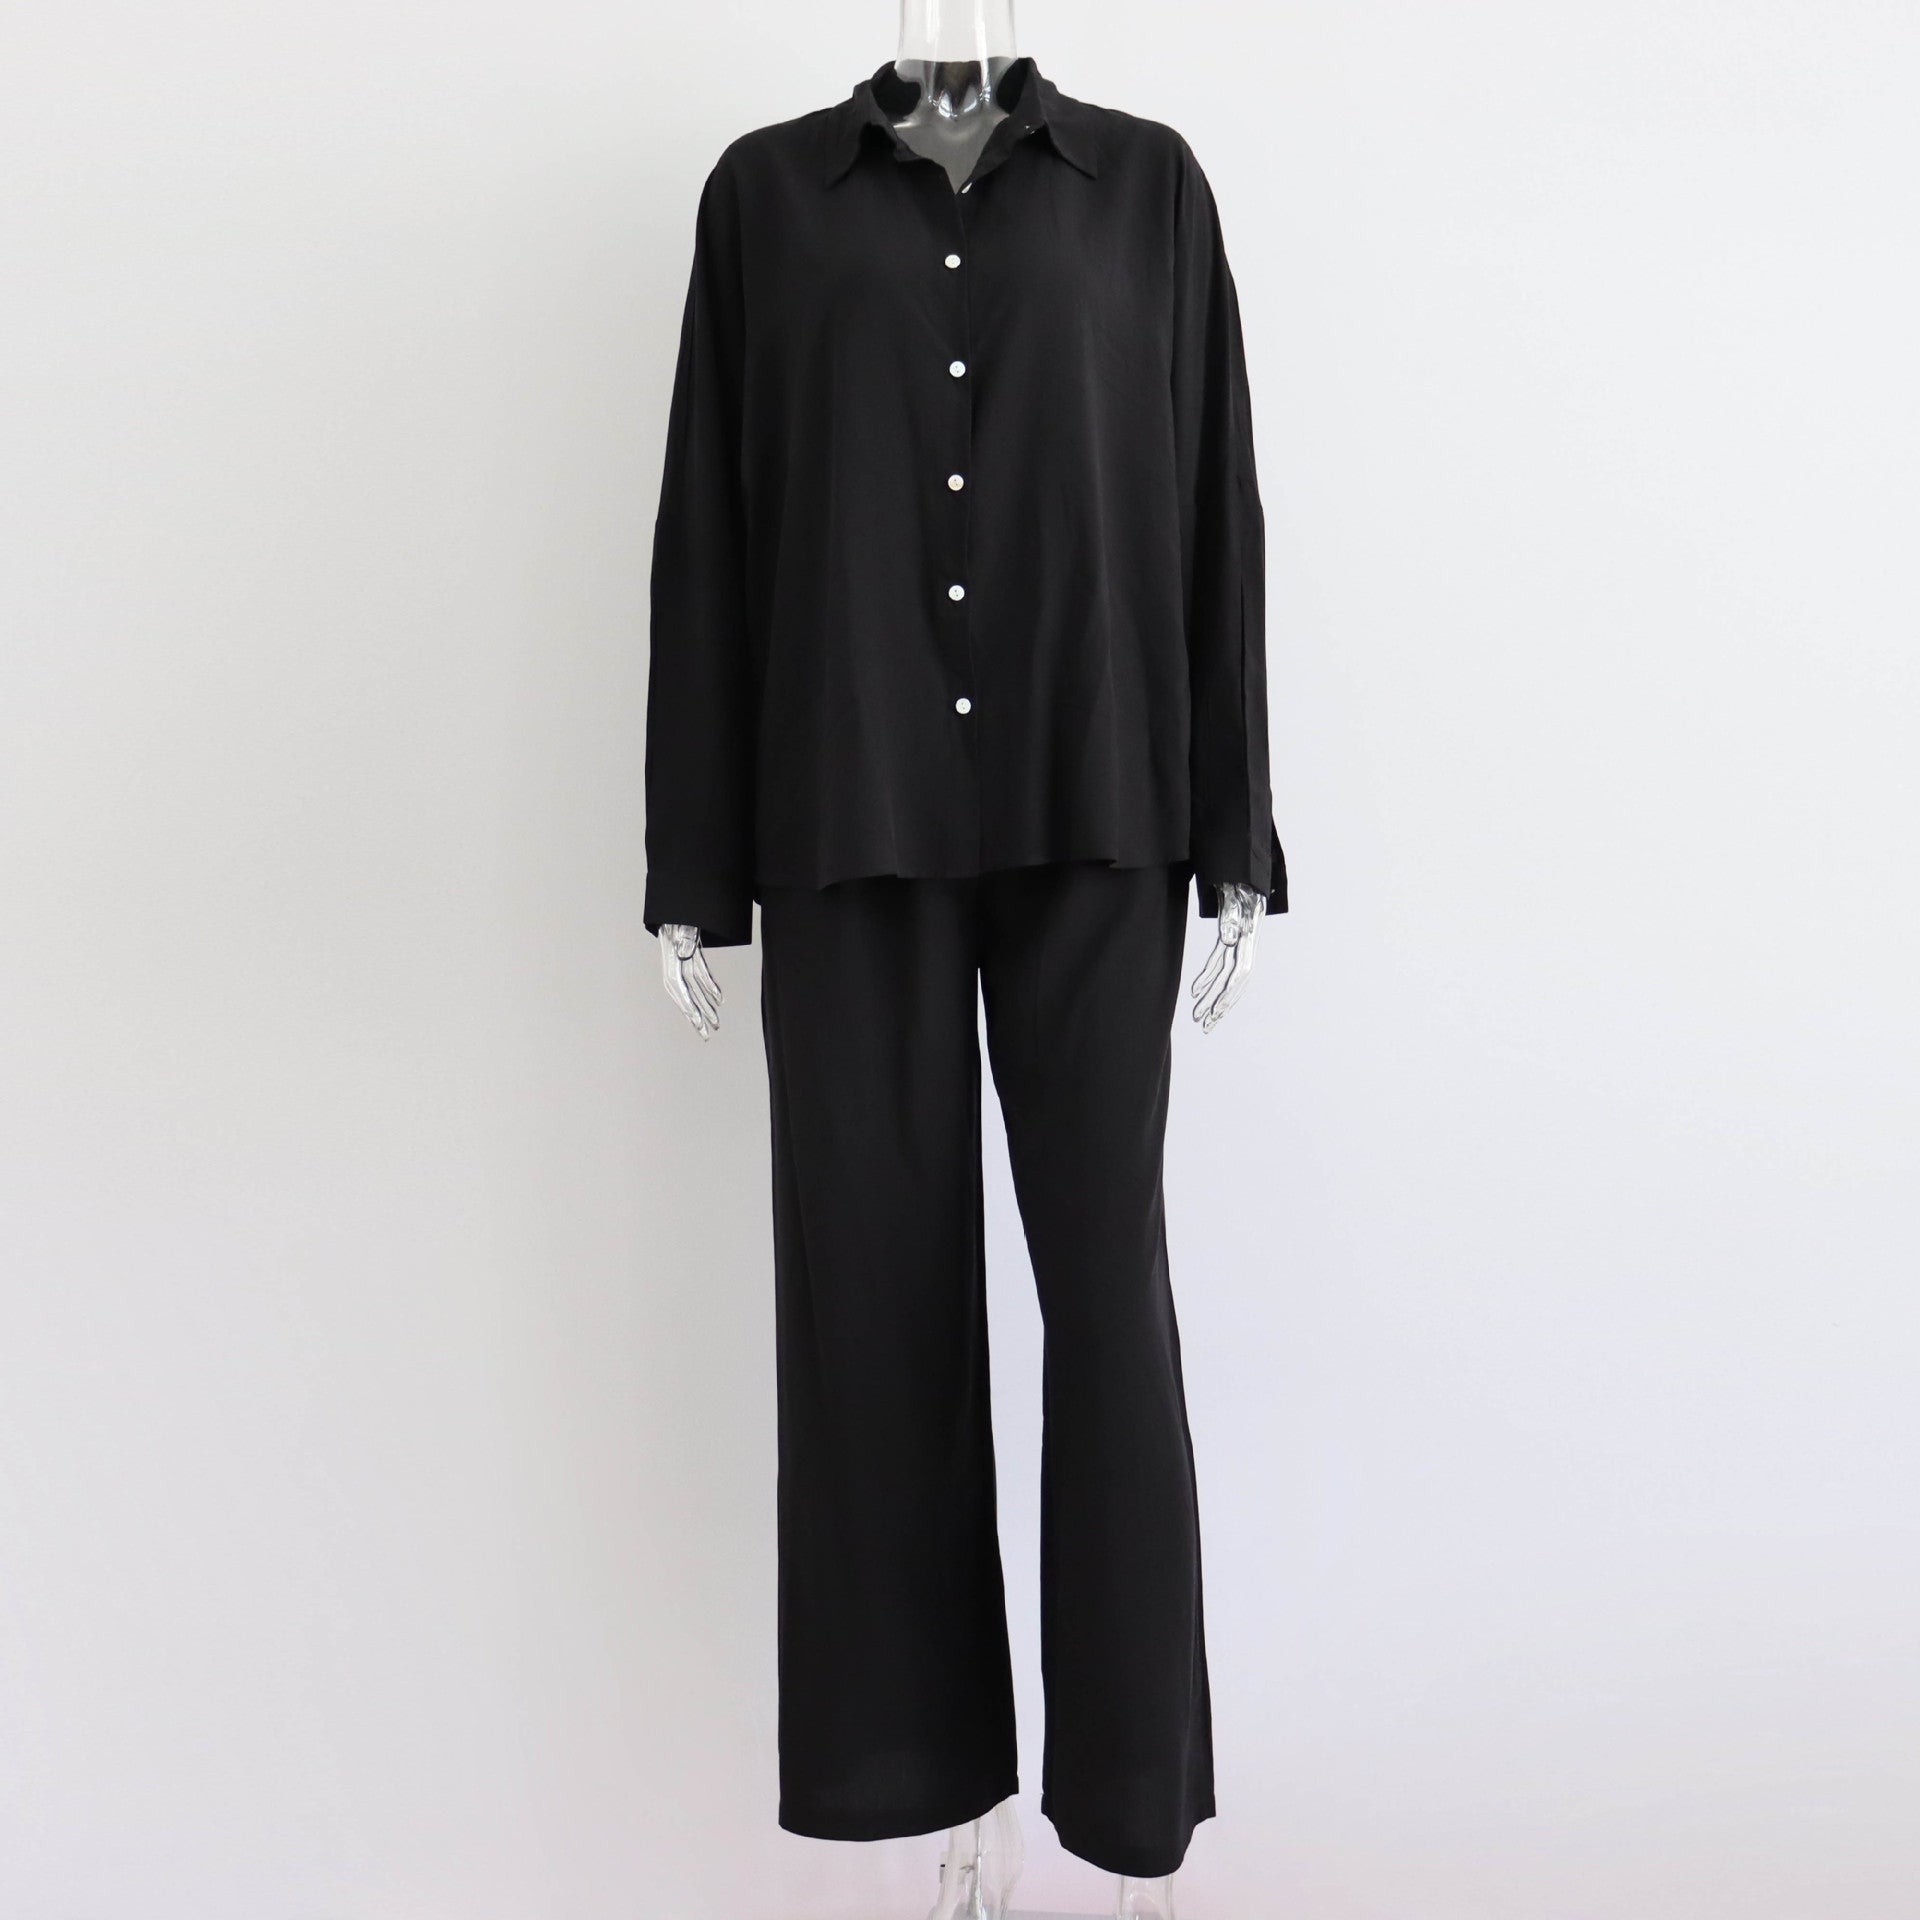 Early Autumn Casual Suit Women Y2g Vacation Batwing Sleeve Shirt Top Straight Leg Trousers Two Piece Suit